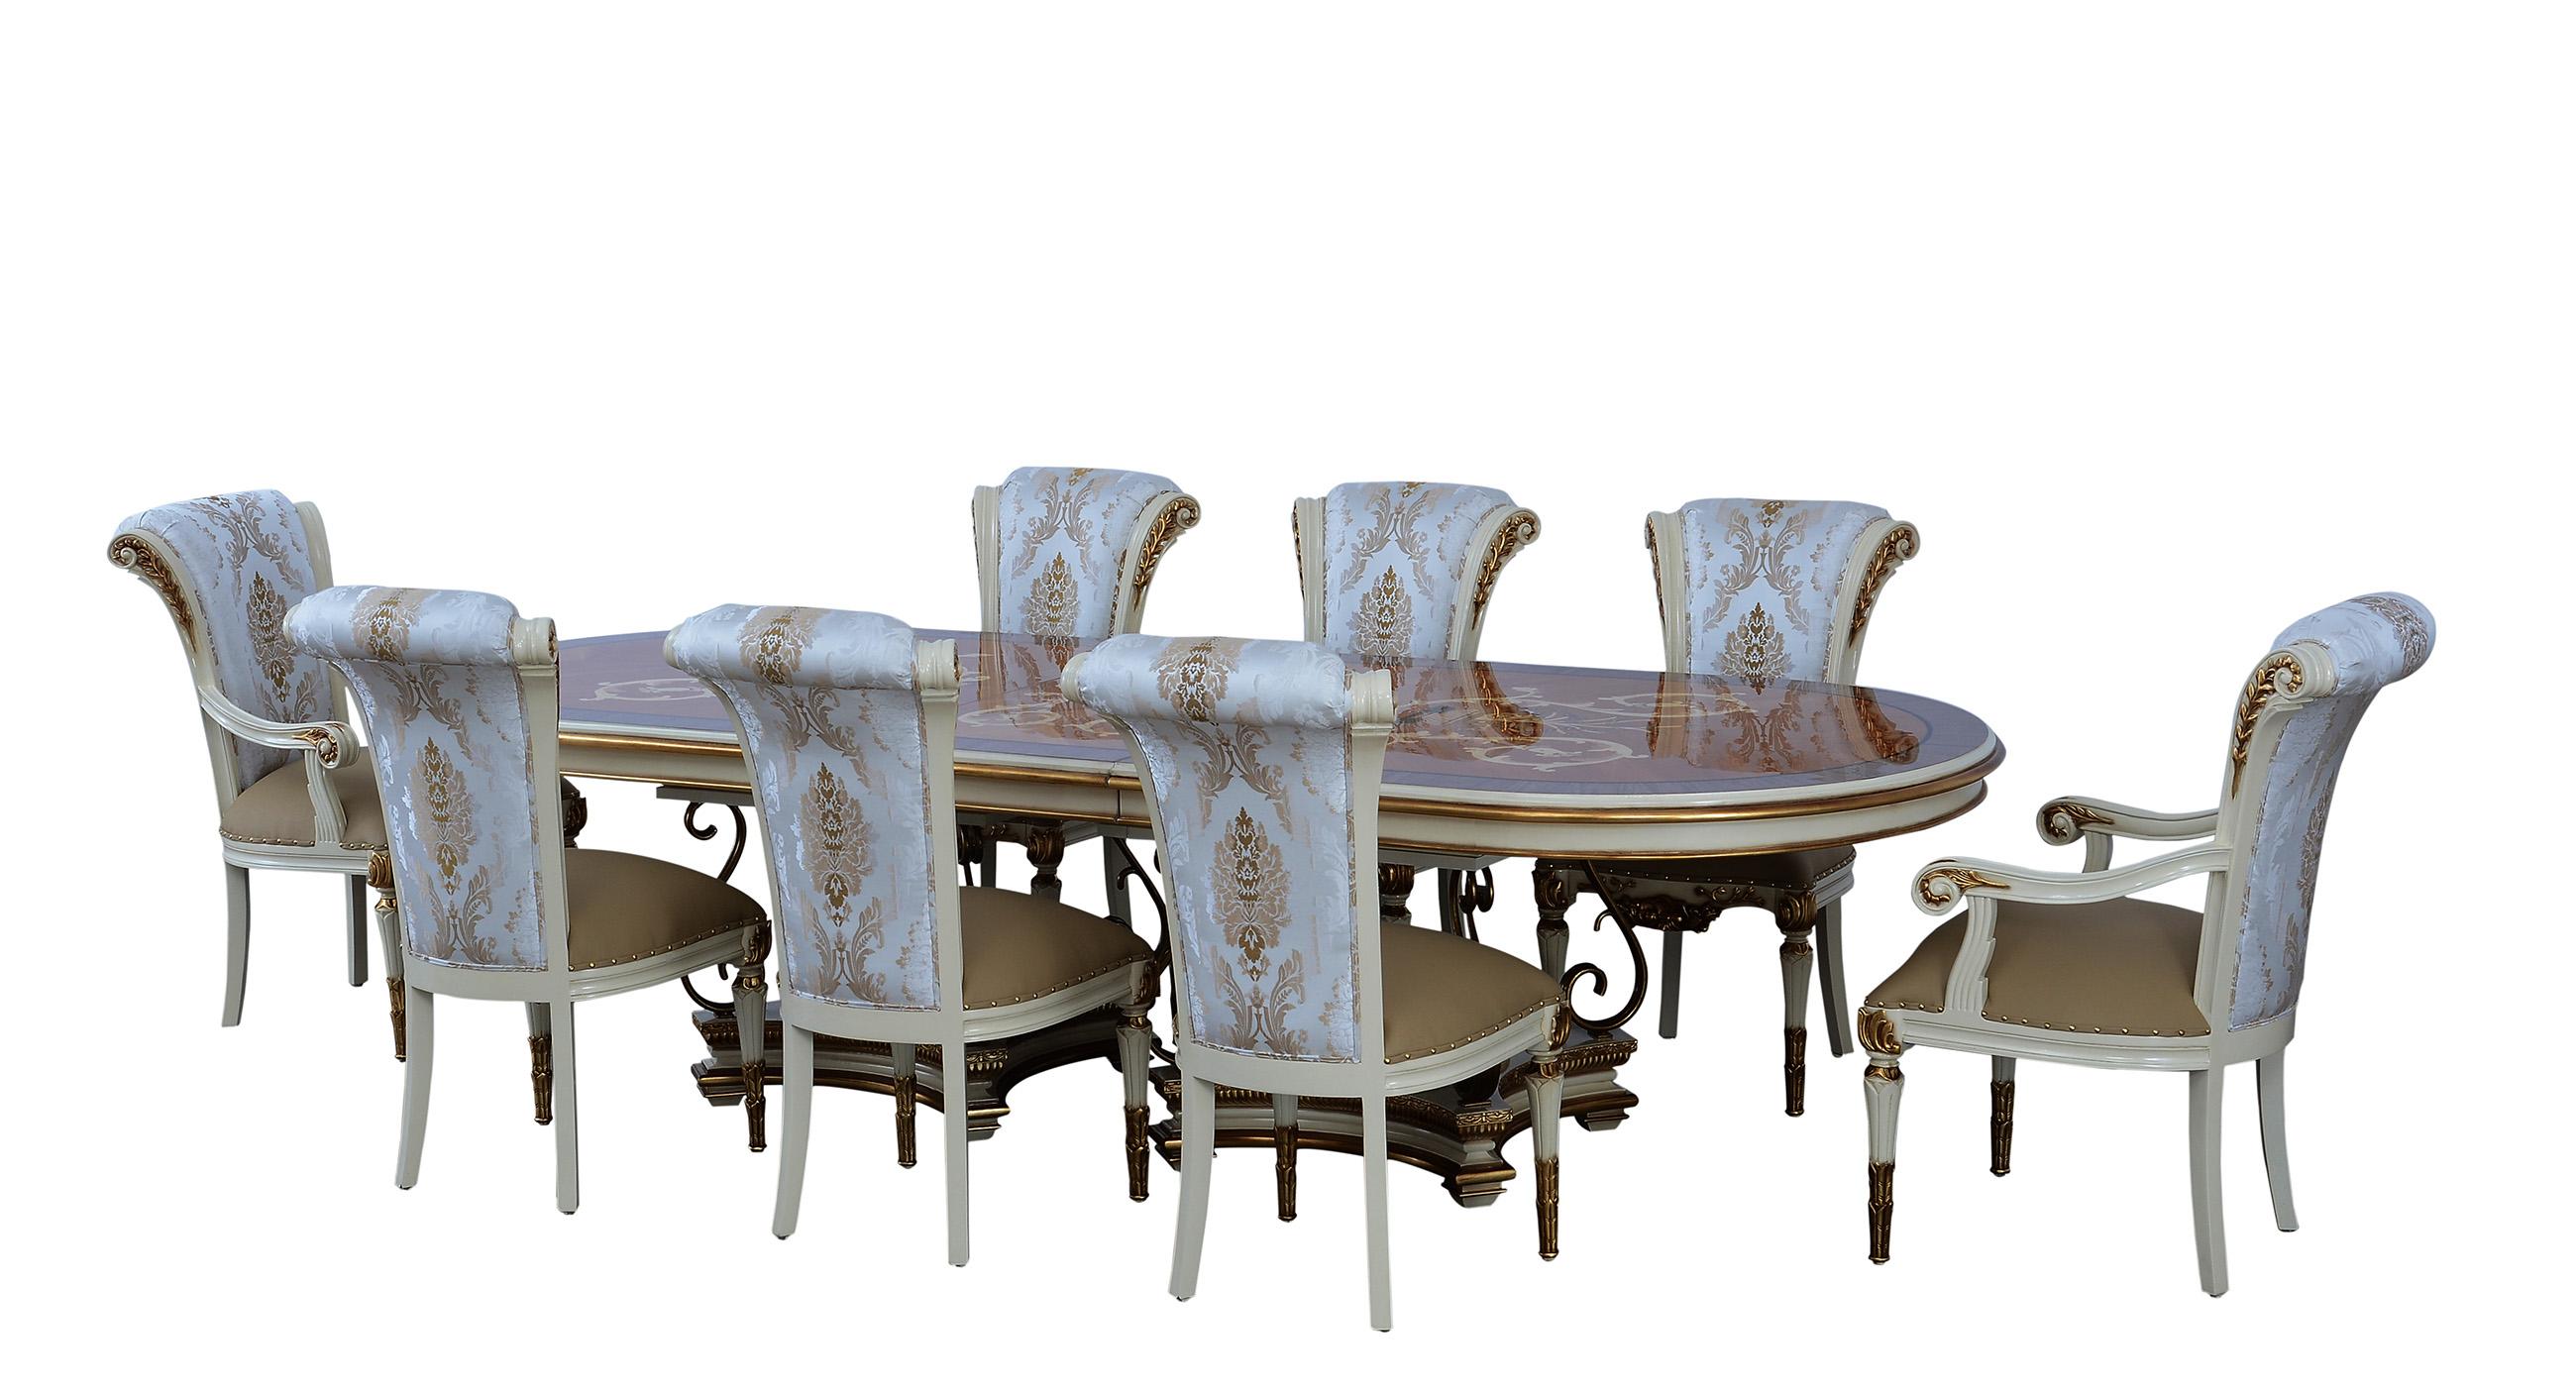 Classic, Traditional Oval Dining Table Set VALENTINA 51959-DT-7PC in Ebony, Gold, Beige Leather